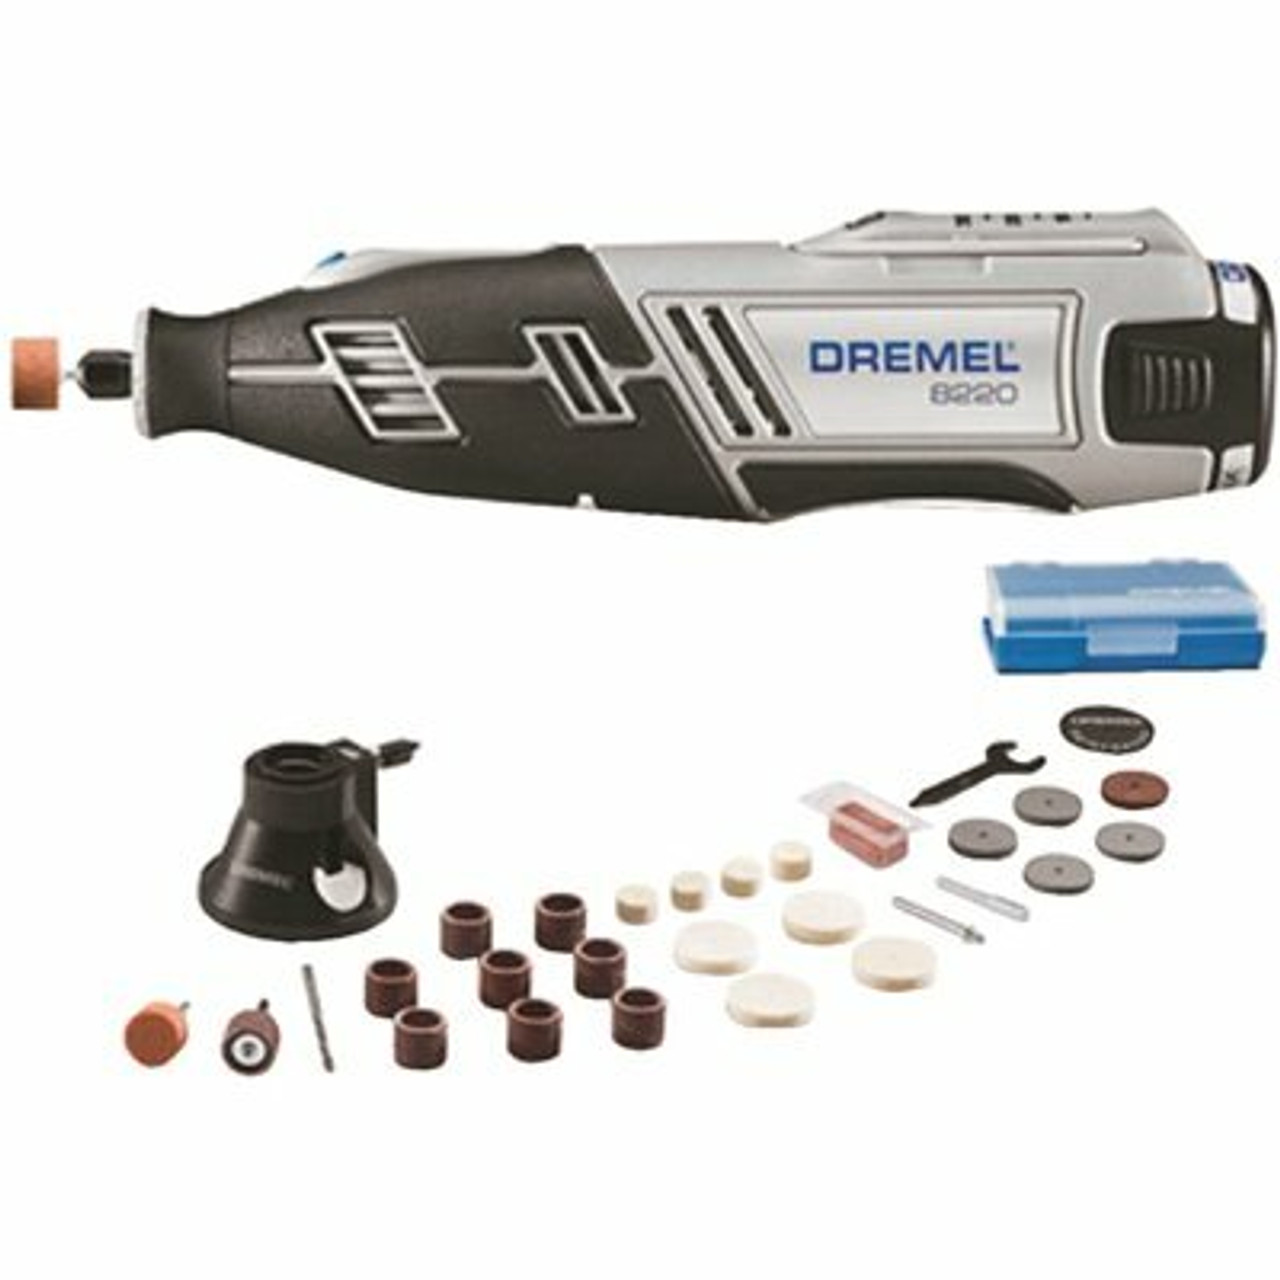 8220 Series 12-Volt Max Lithium-Ion Variable Speed Cordless Rotary Tool Kit With 28 Accessories, 1 Attachment, And Case